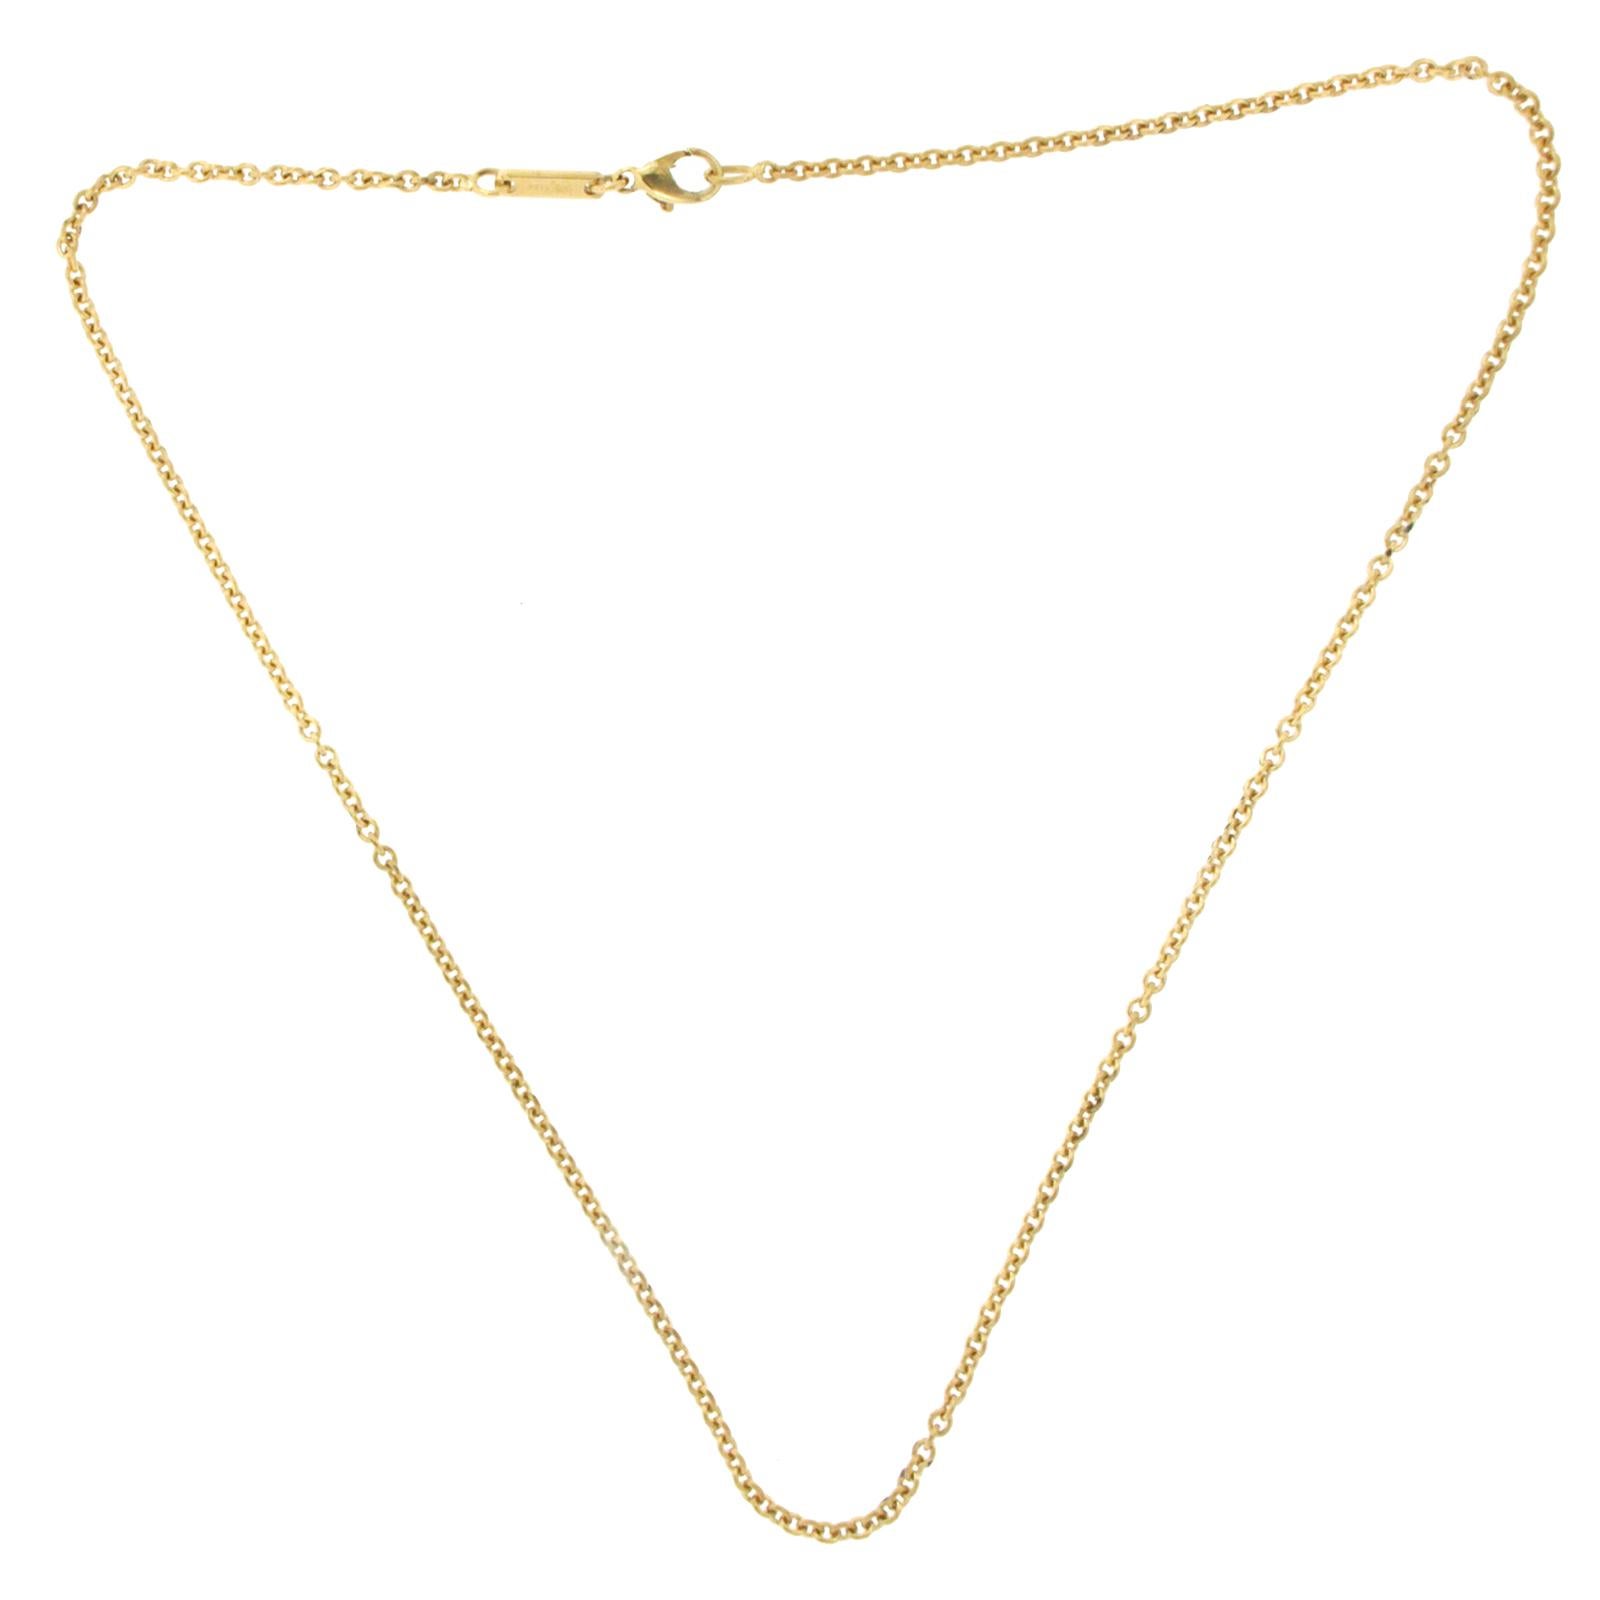 Chopard 18 Karat Yellow Gold Rolo Chain Necklace